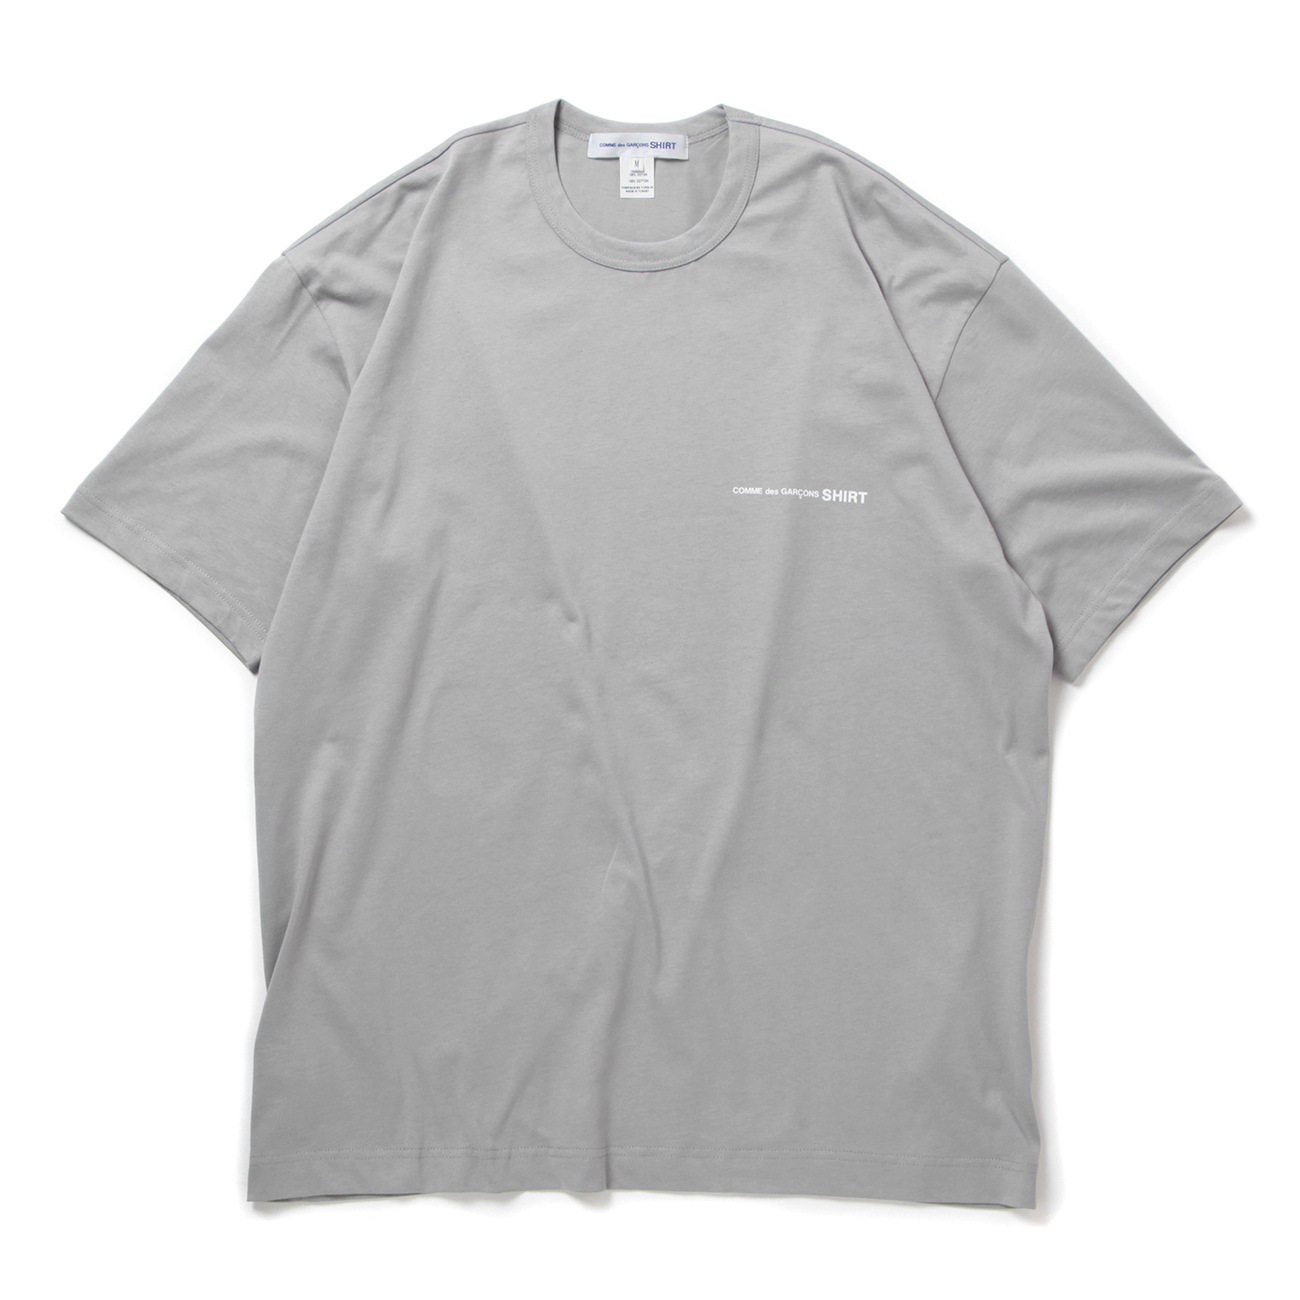 cotton jersey plain with printed CDG SHIRT logo on chest - Grey